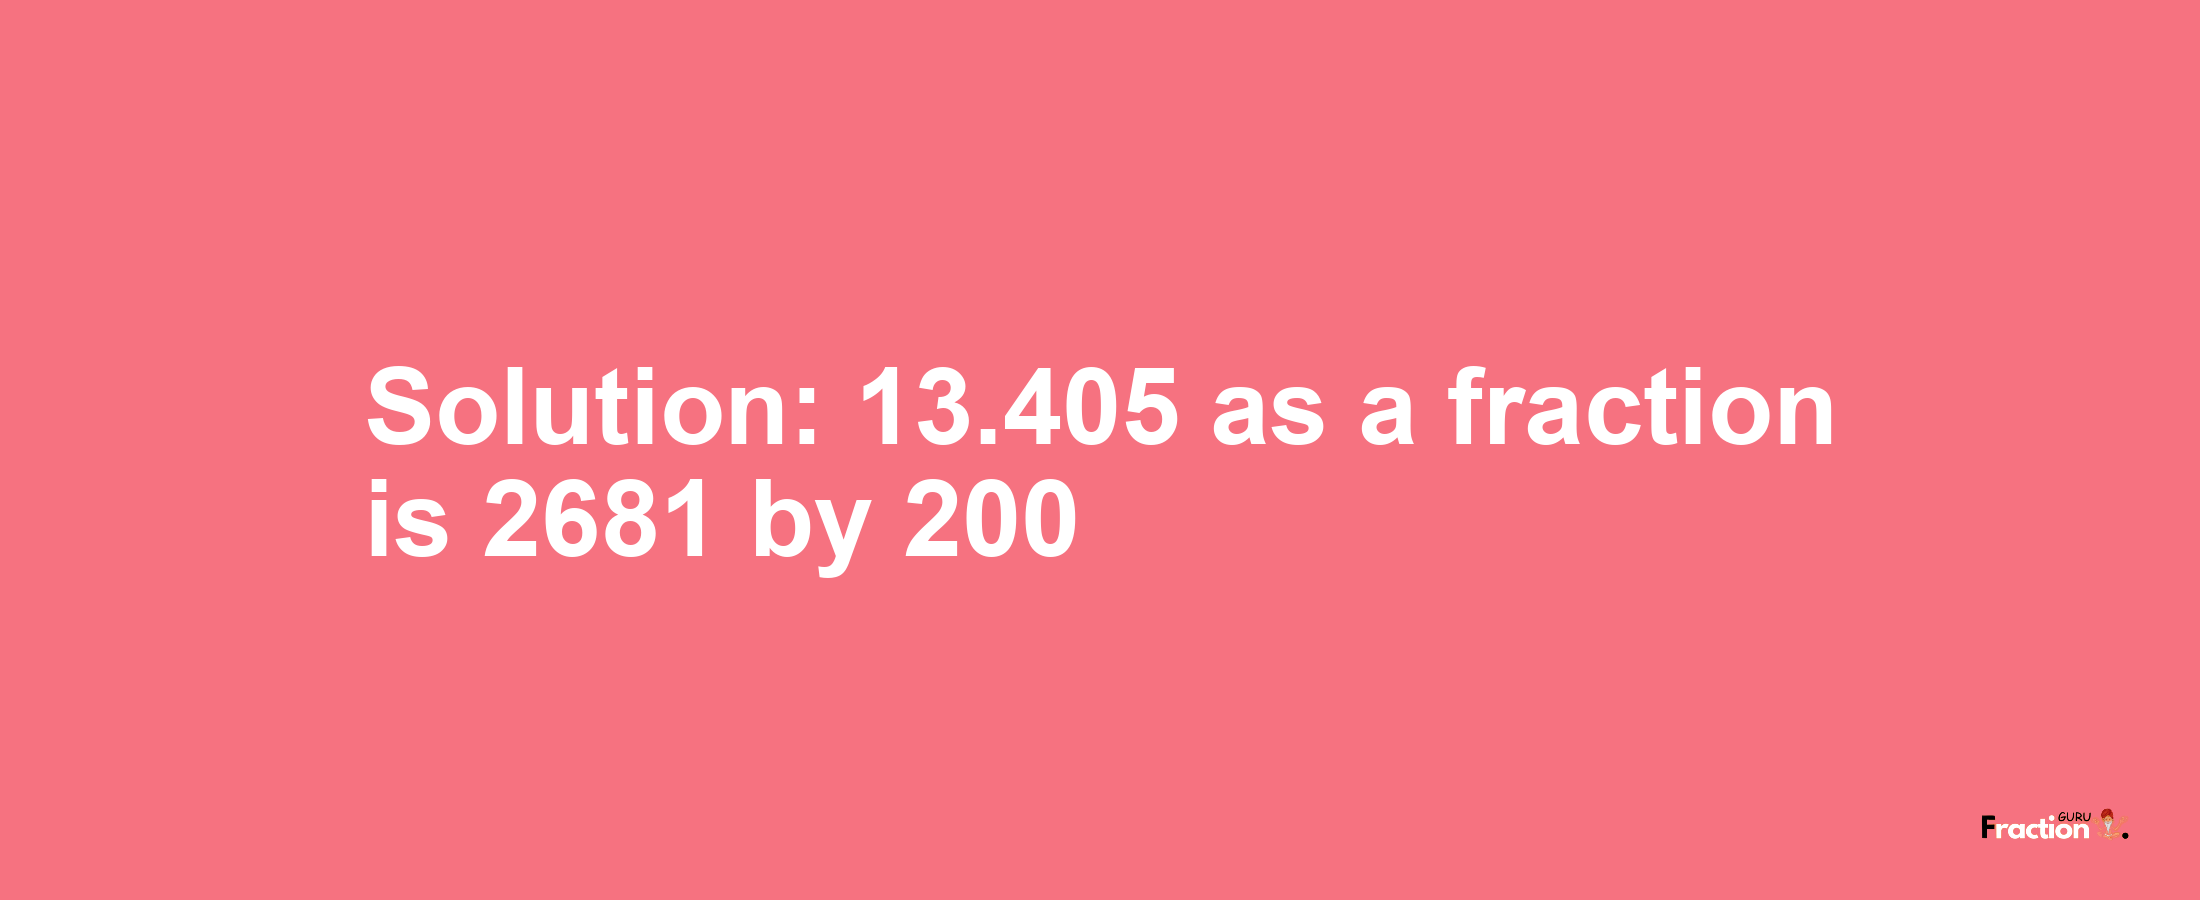 Solution:13.405 as a fraction is 2681/200